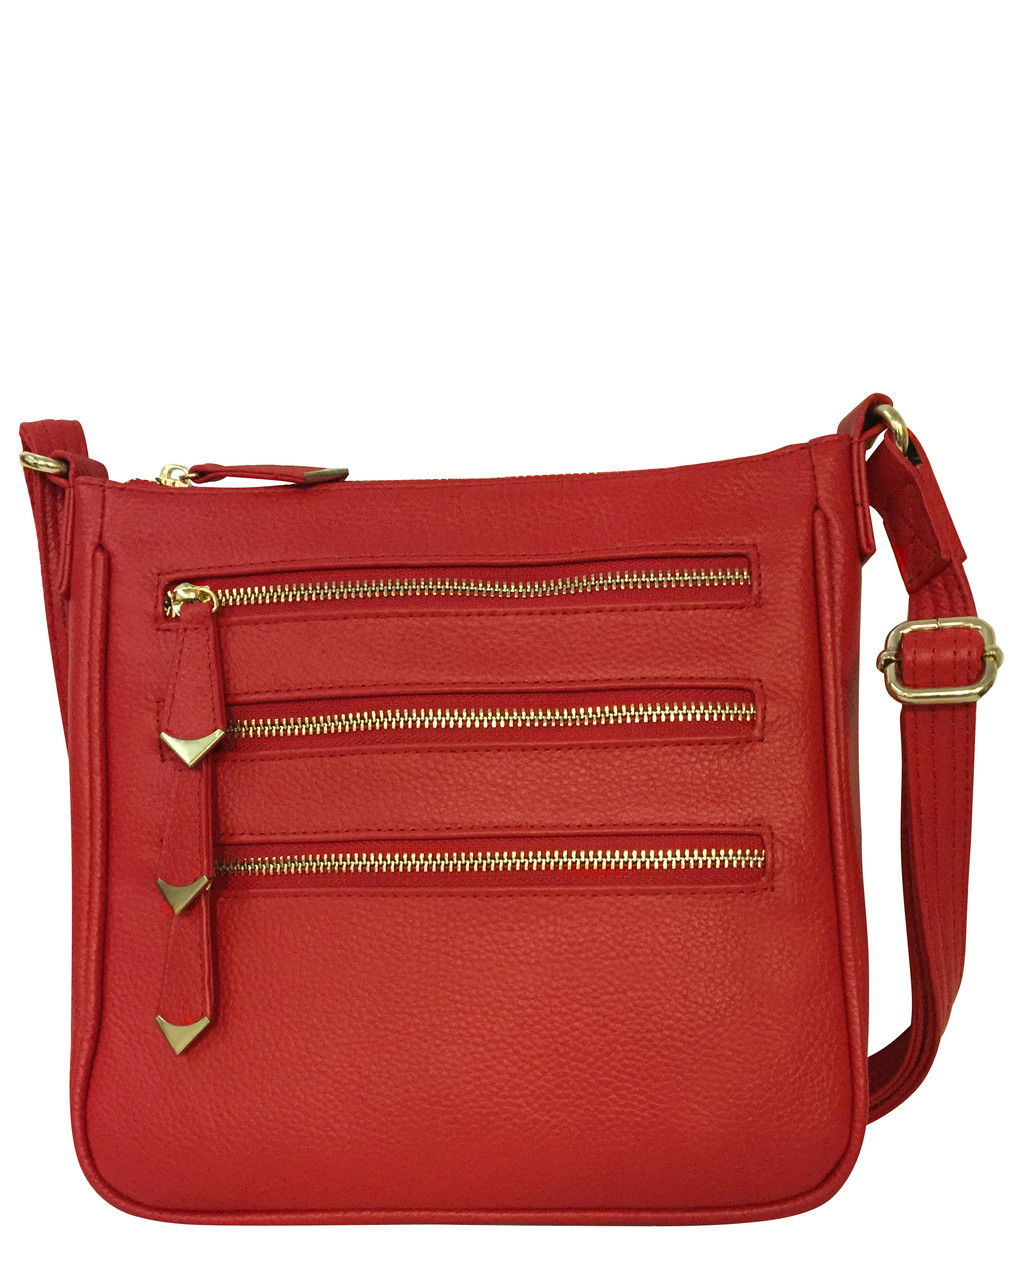 Chic Triple Zip Concealed Carry PurseNew style. Just in